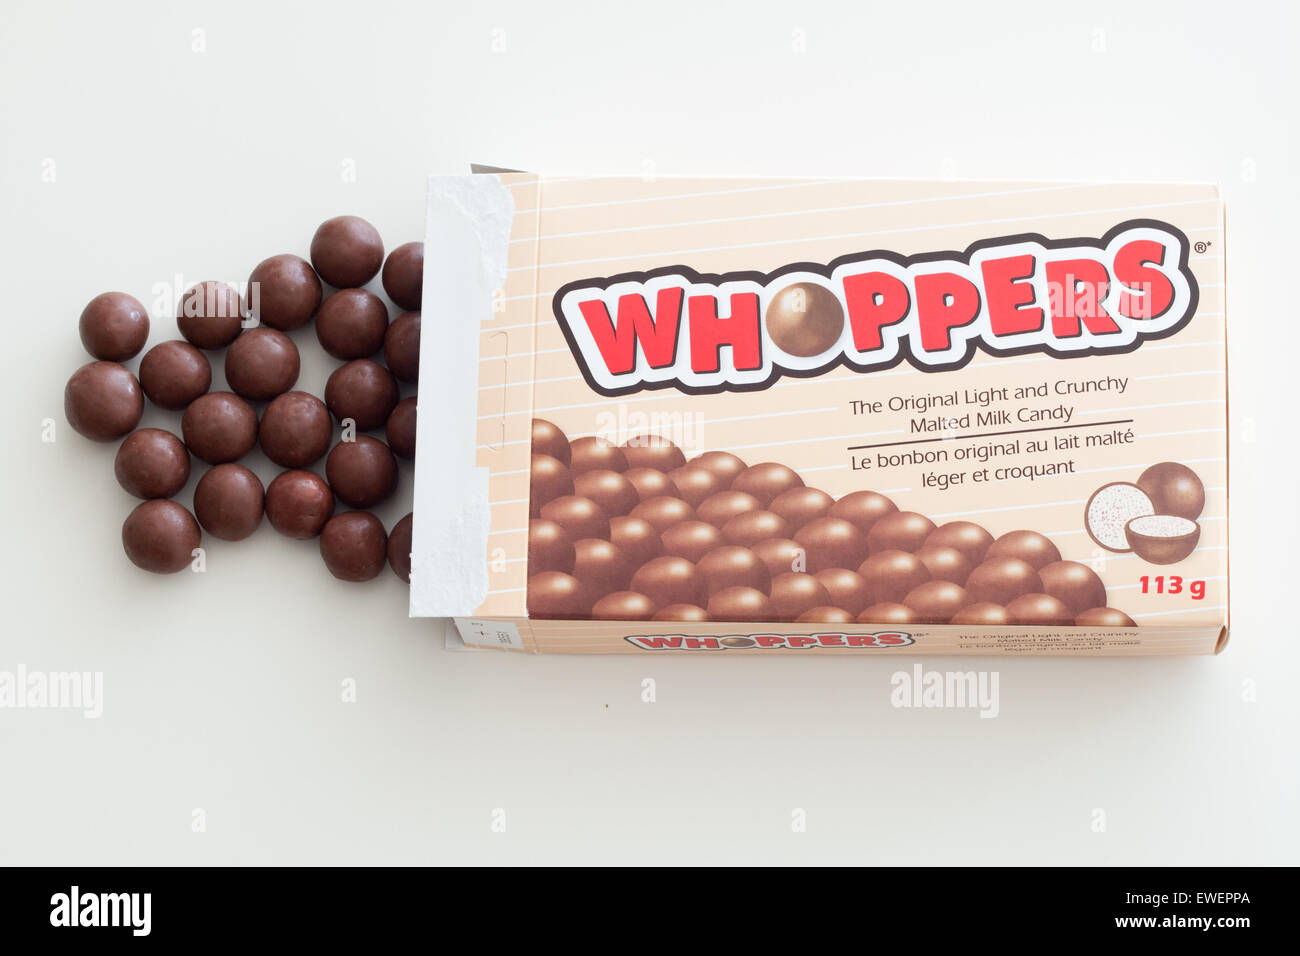 A box of Whoppers candy. Whoppers are malted milk balls covered